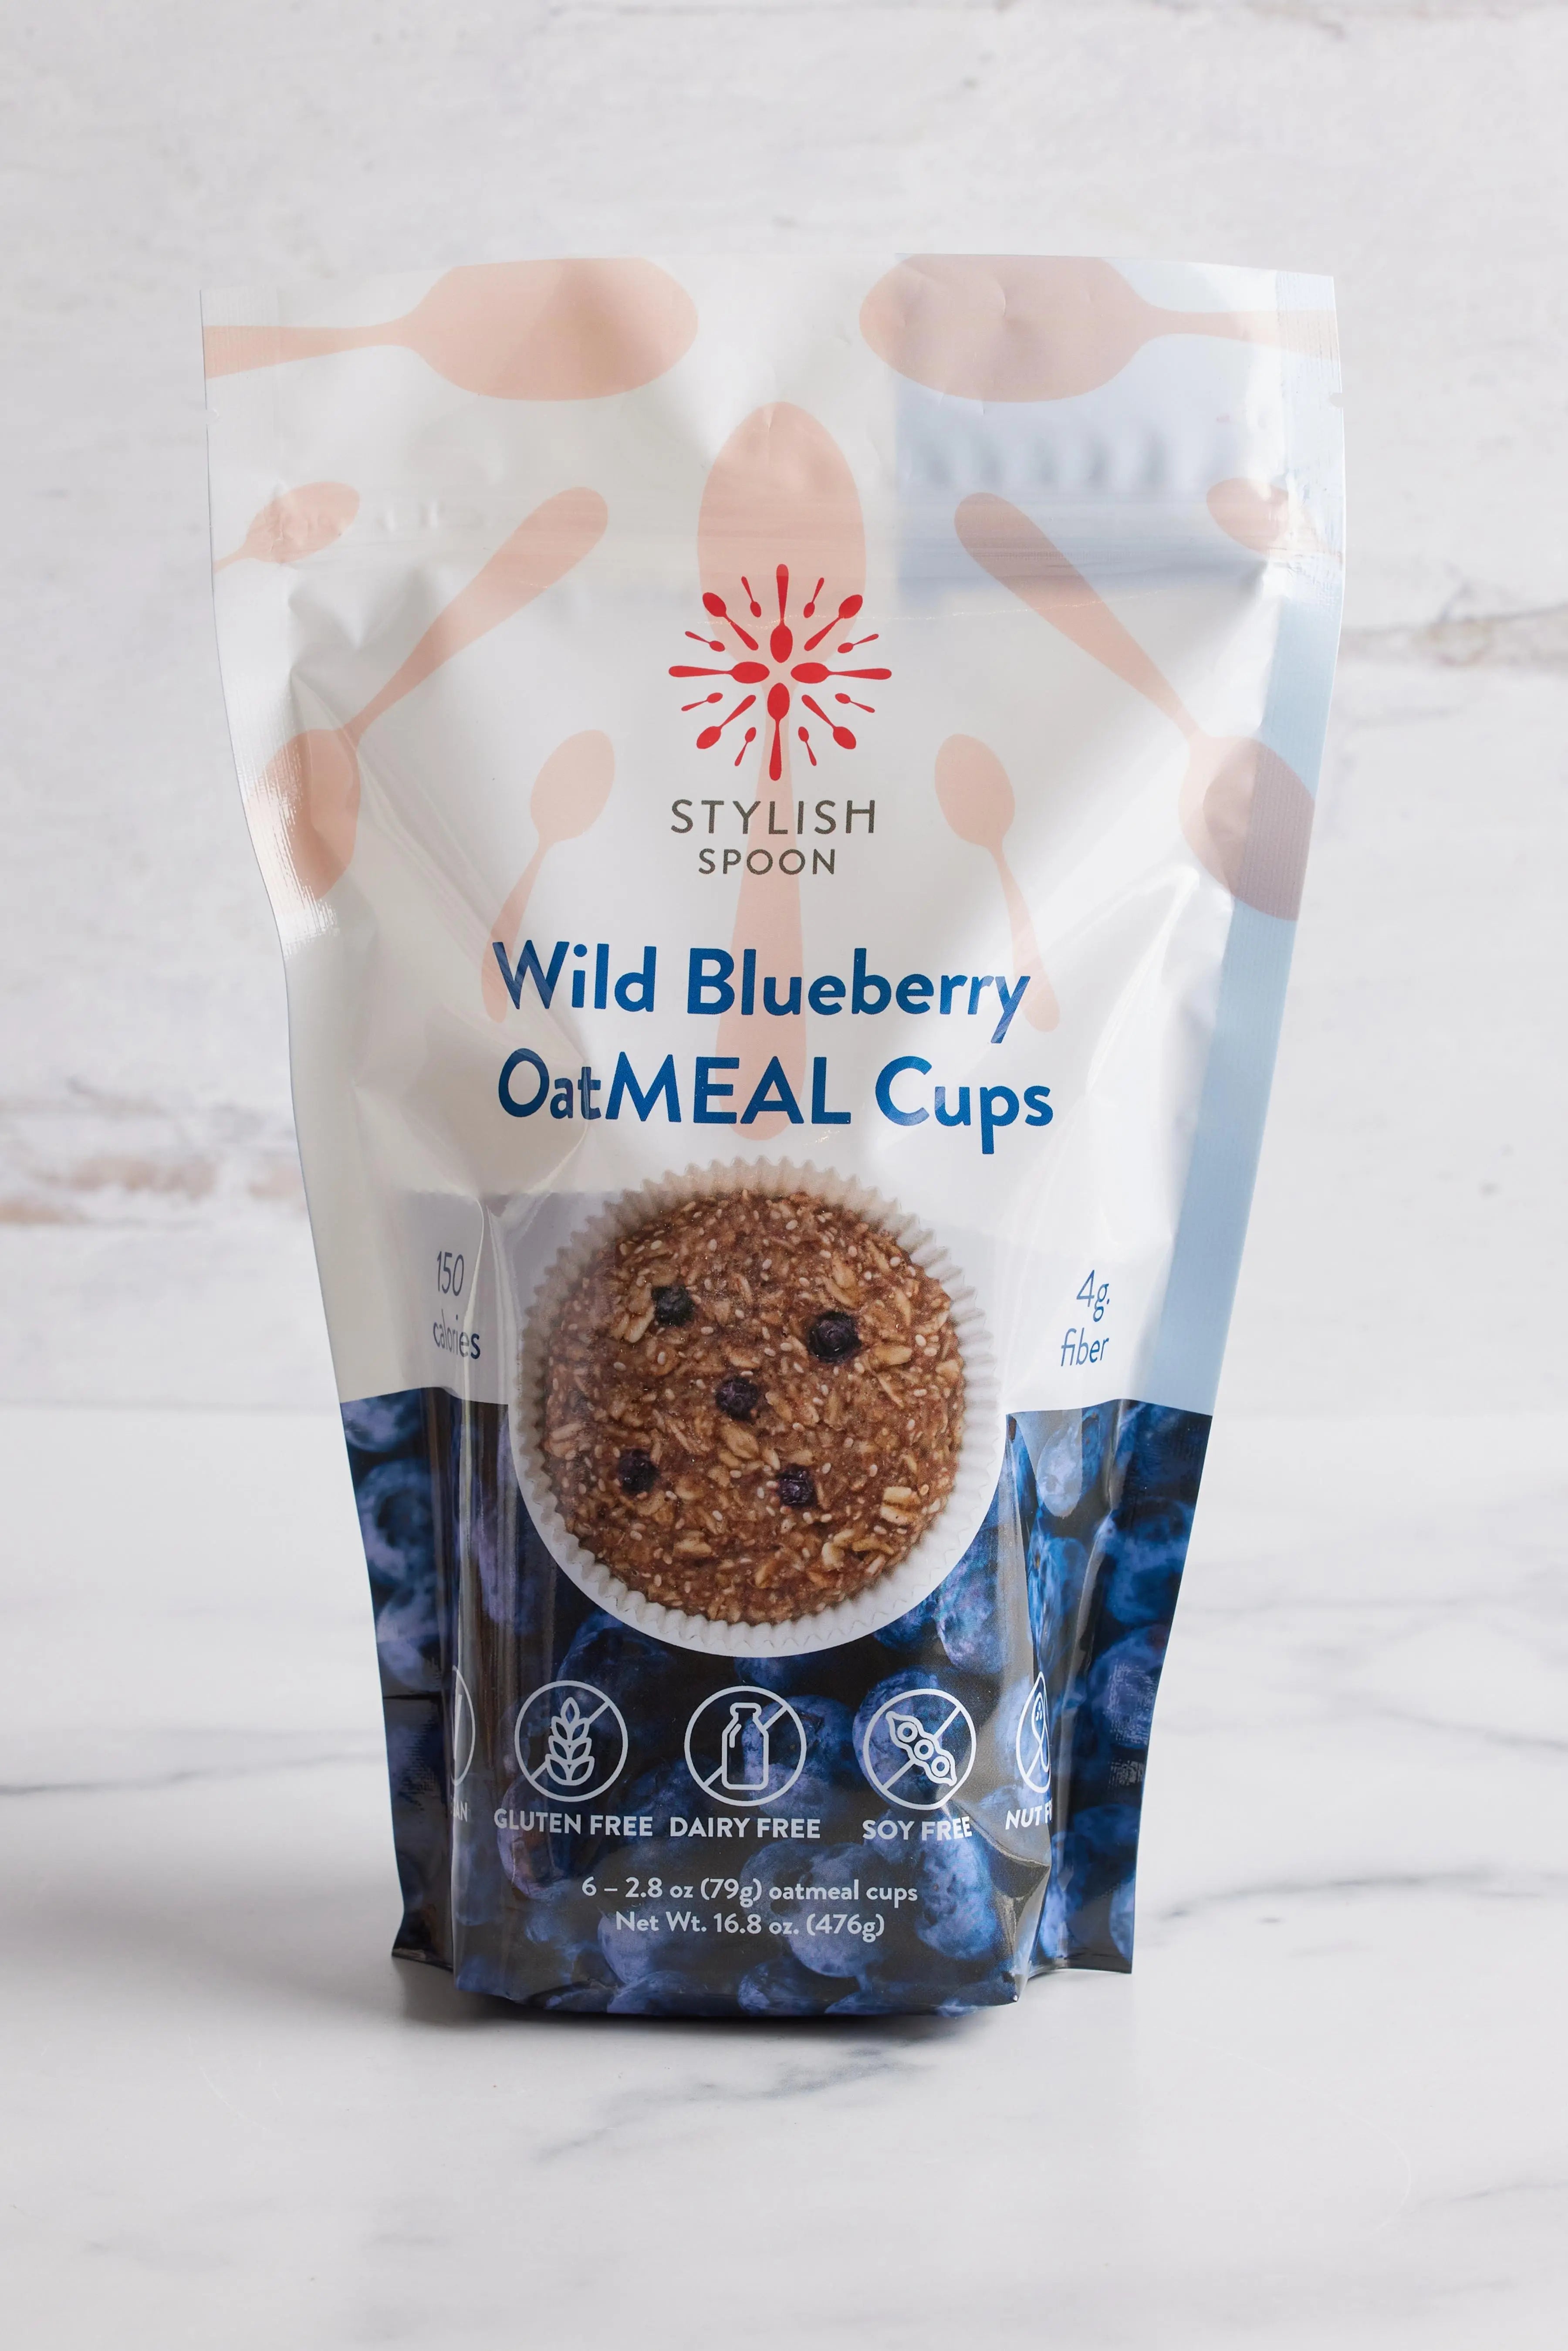 Wild Blueberry OatMEAL Cups Stylish Spoon